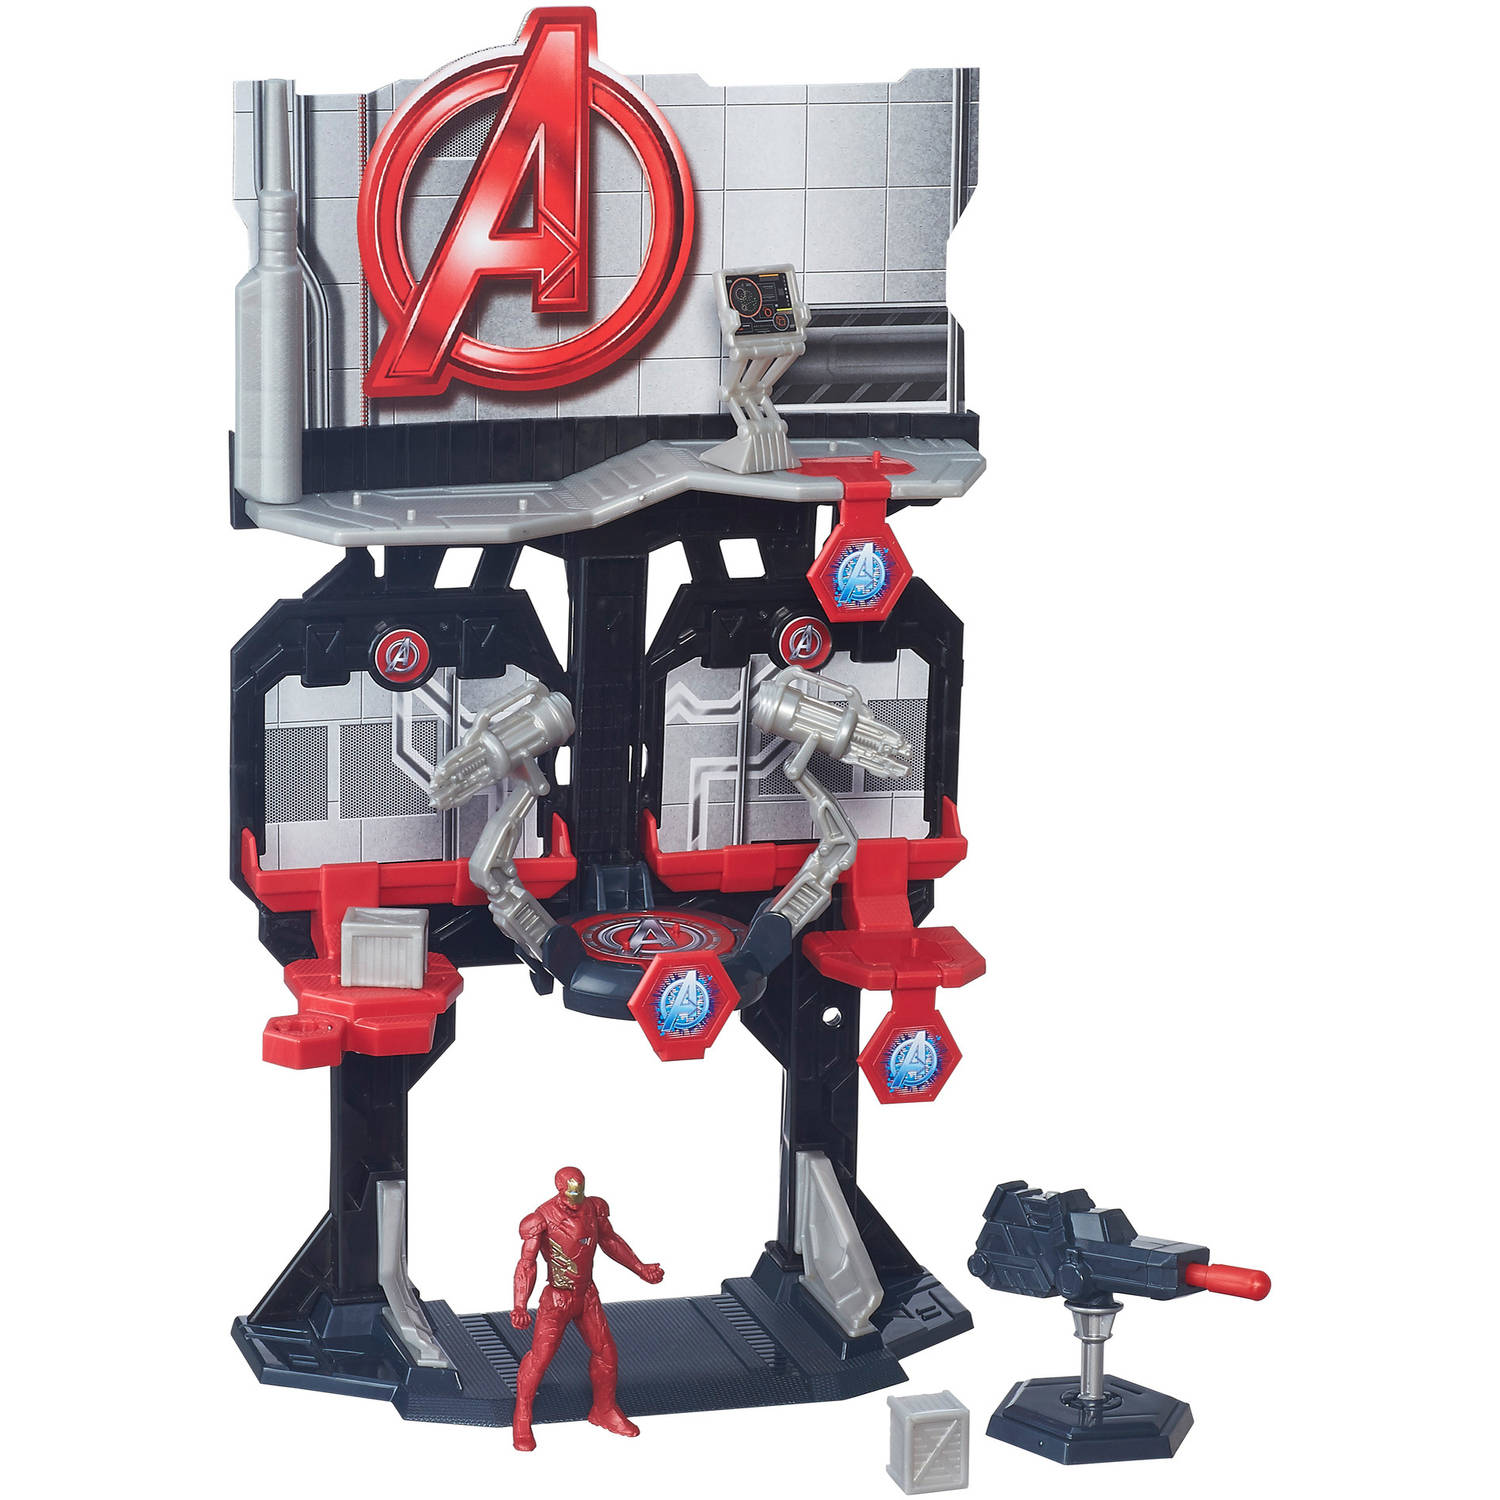 Captain America Marvel: Civil War: Iron Man Armory Action Figure Set, Ages 4 and up - image 1 of 7